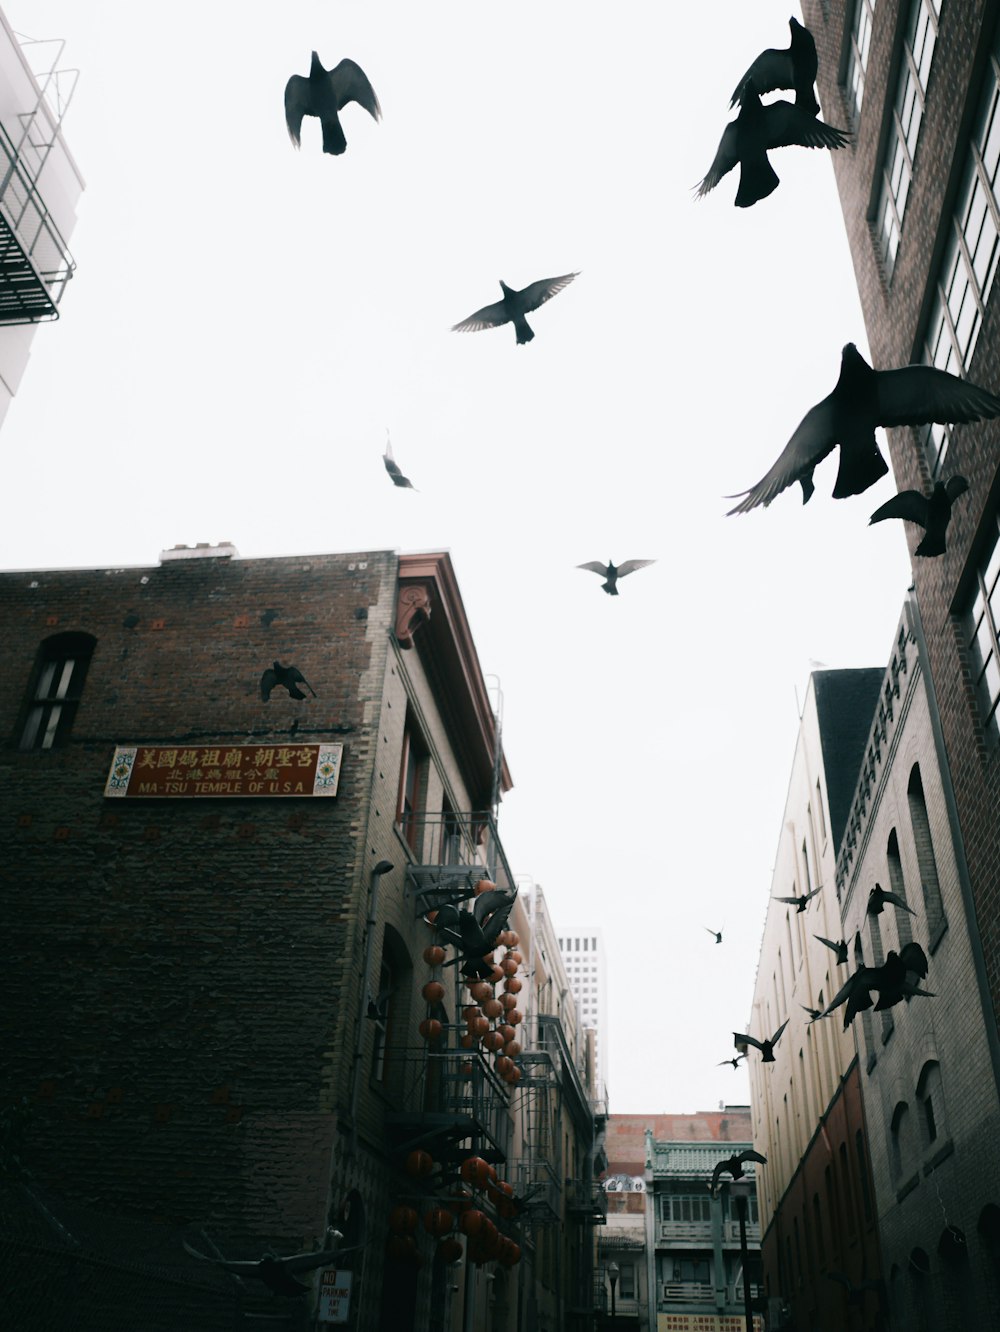 birds flying over the buildings during daytime